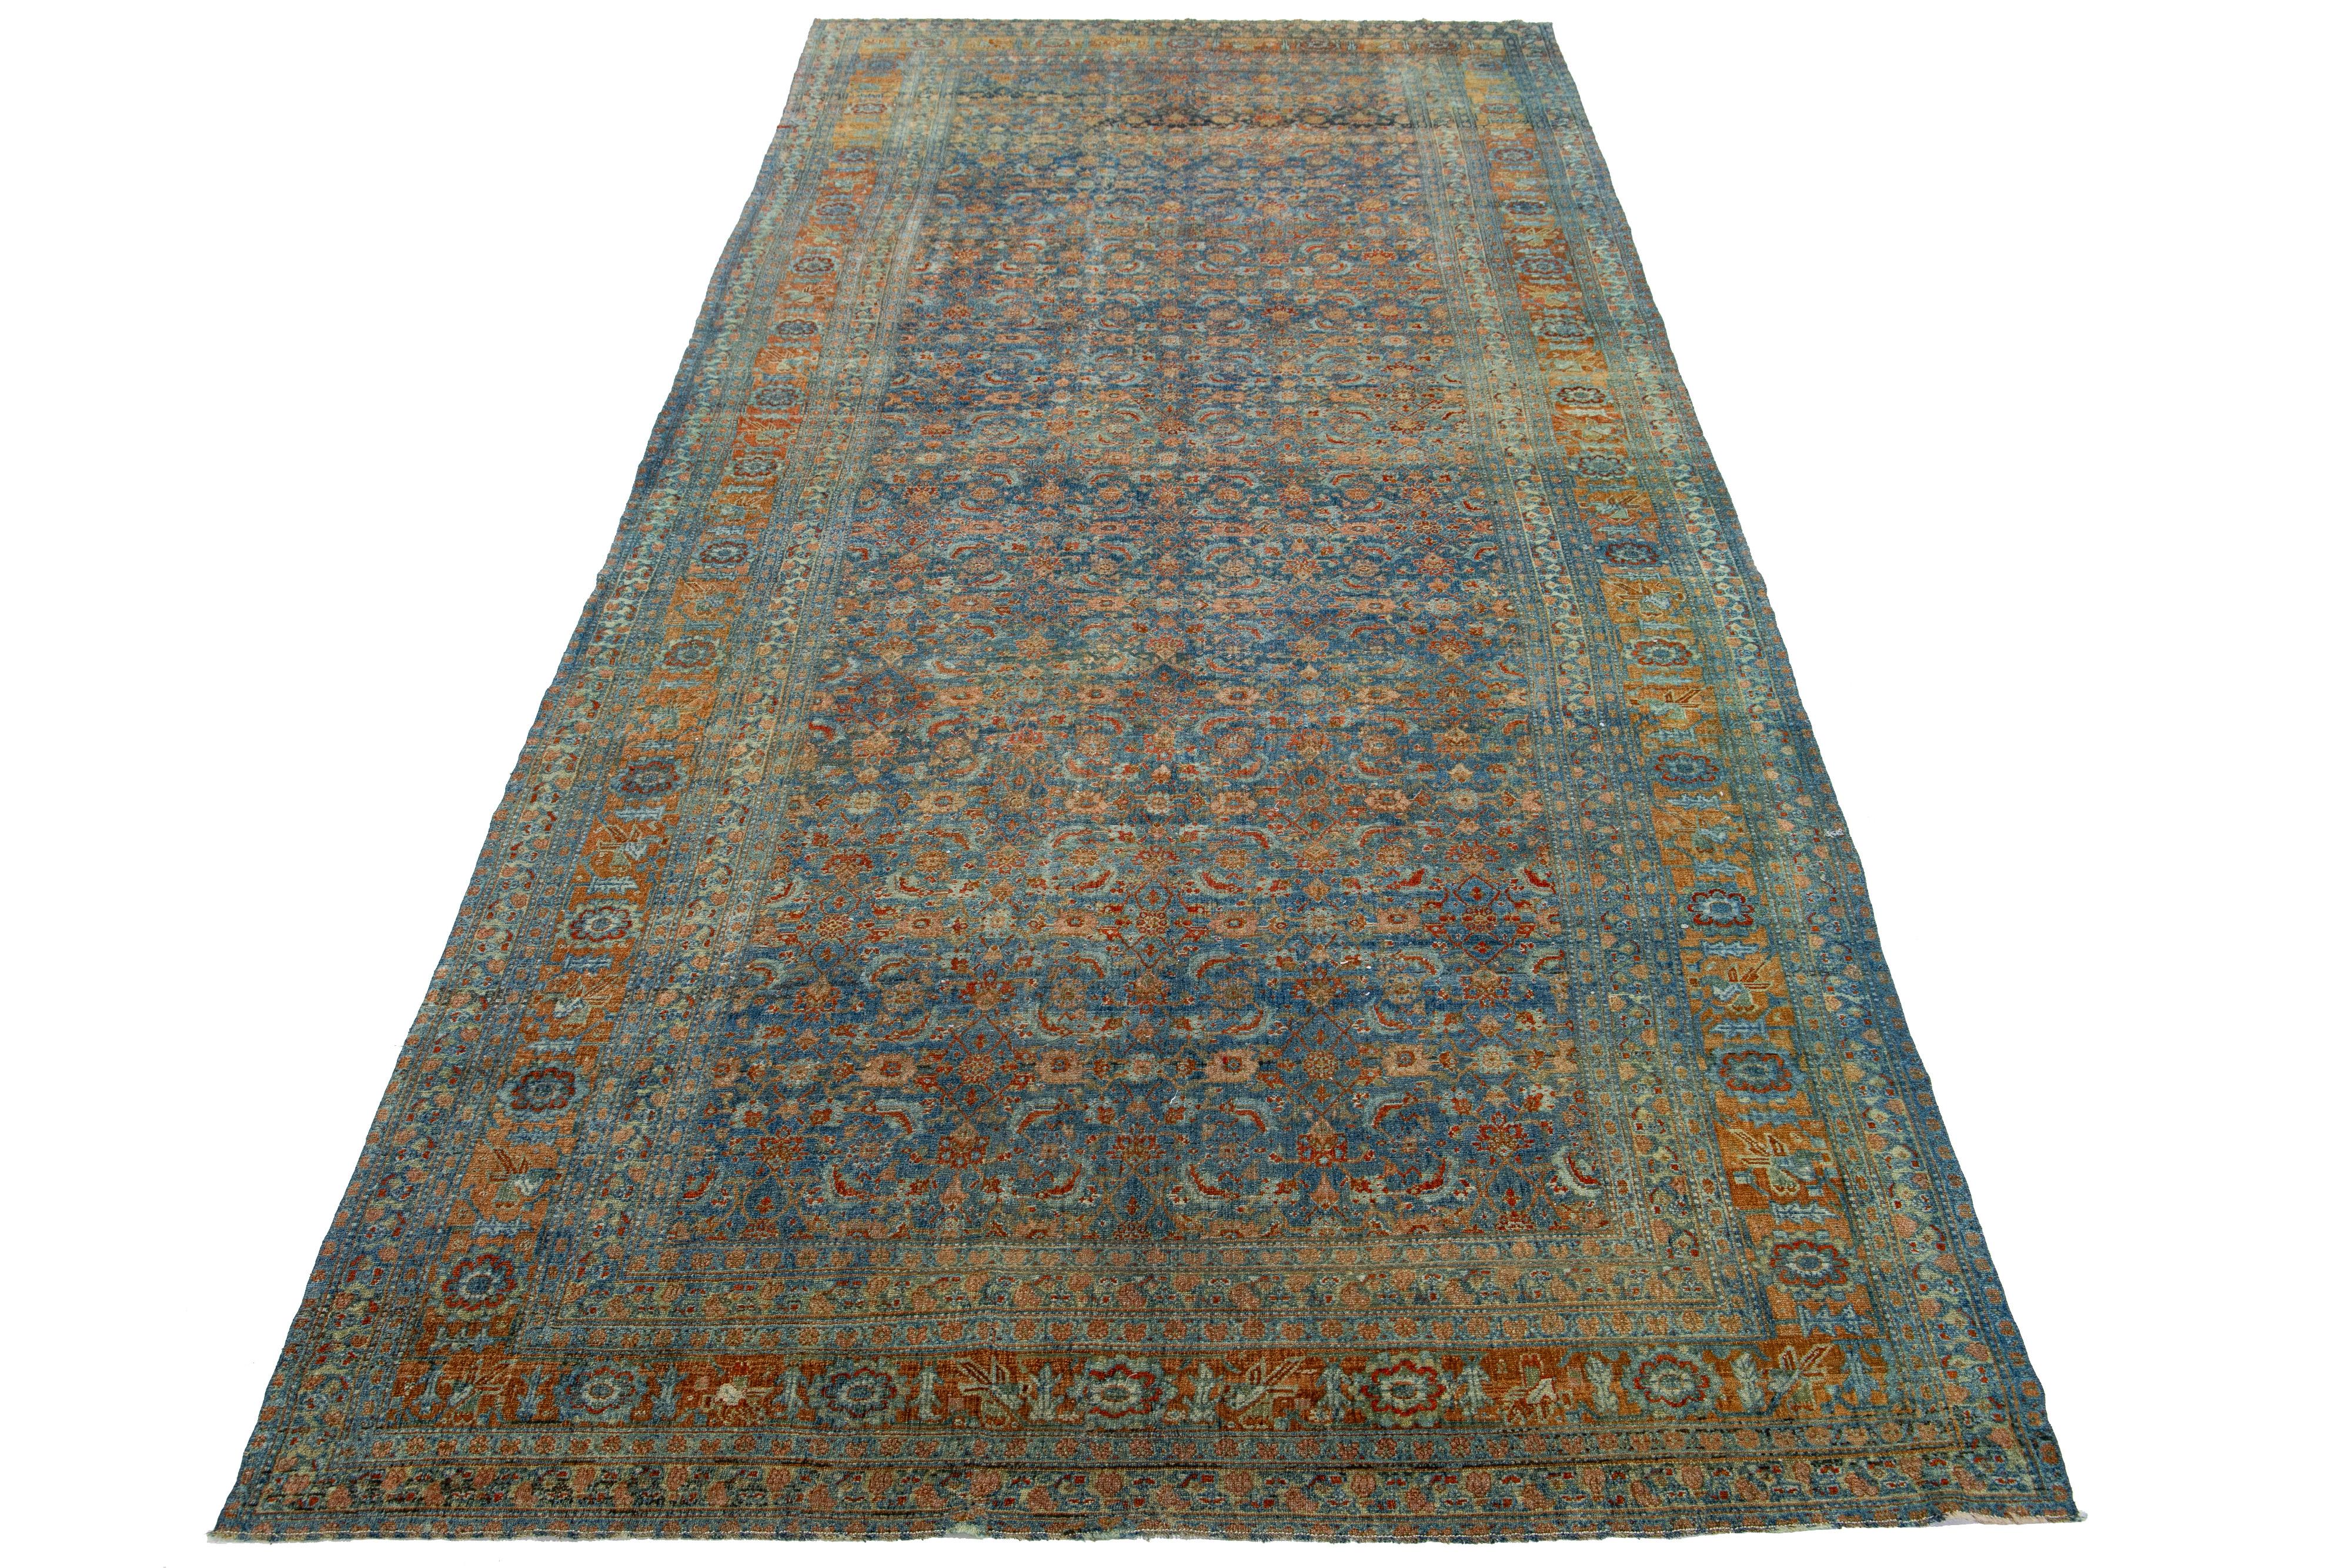 Beautiful antique Bidjar hand-knotted wool runner with a navy blue color field. This Bidjar rug has a designed rusted frame with peach accents in a gorgeous all-over floral design.

This rug measures 6'4